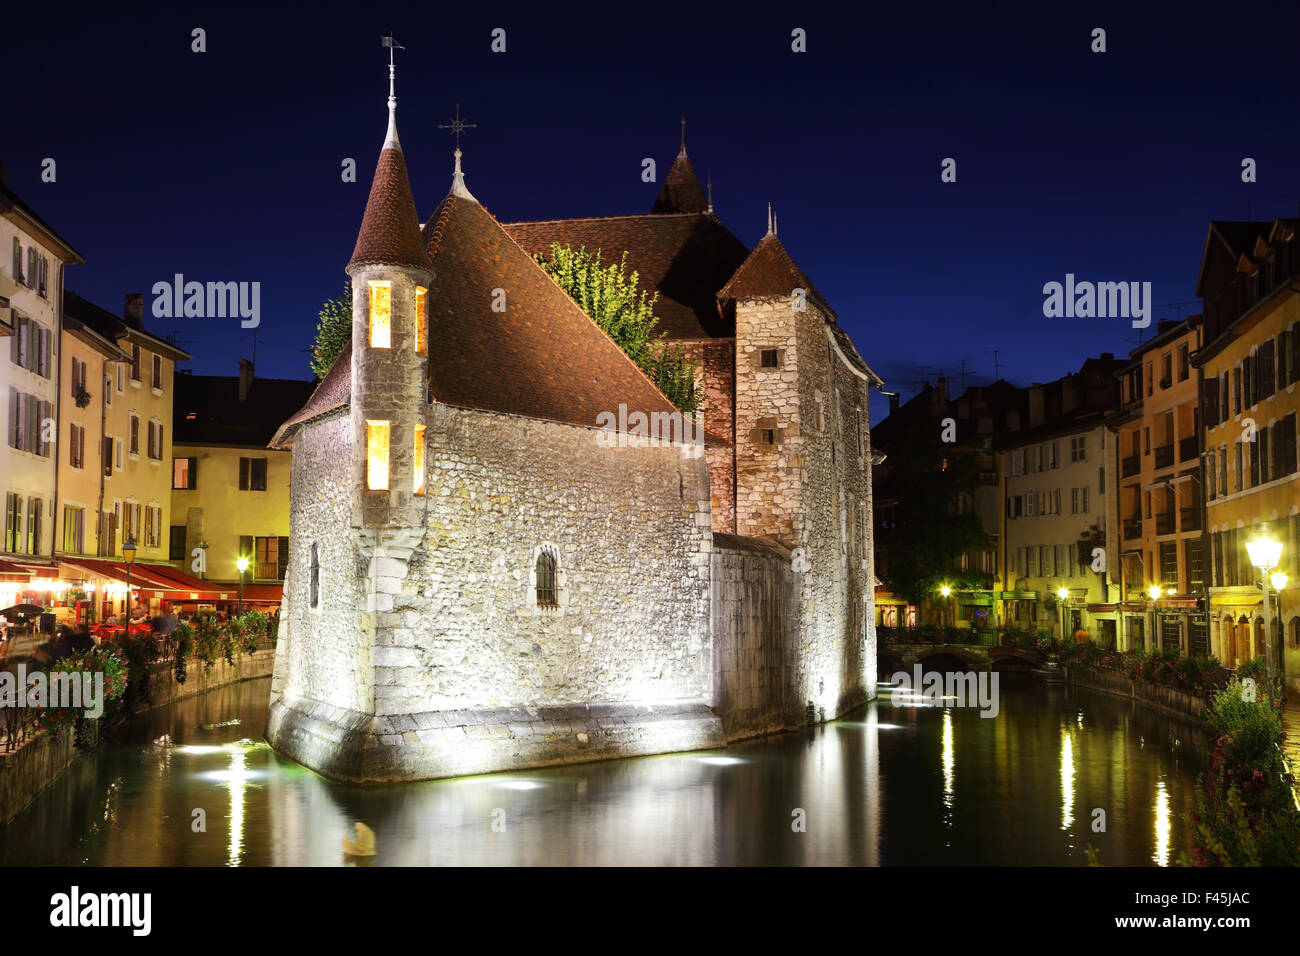 The capital of the Haute-Savoie - Annecy Stock Photo